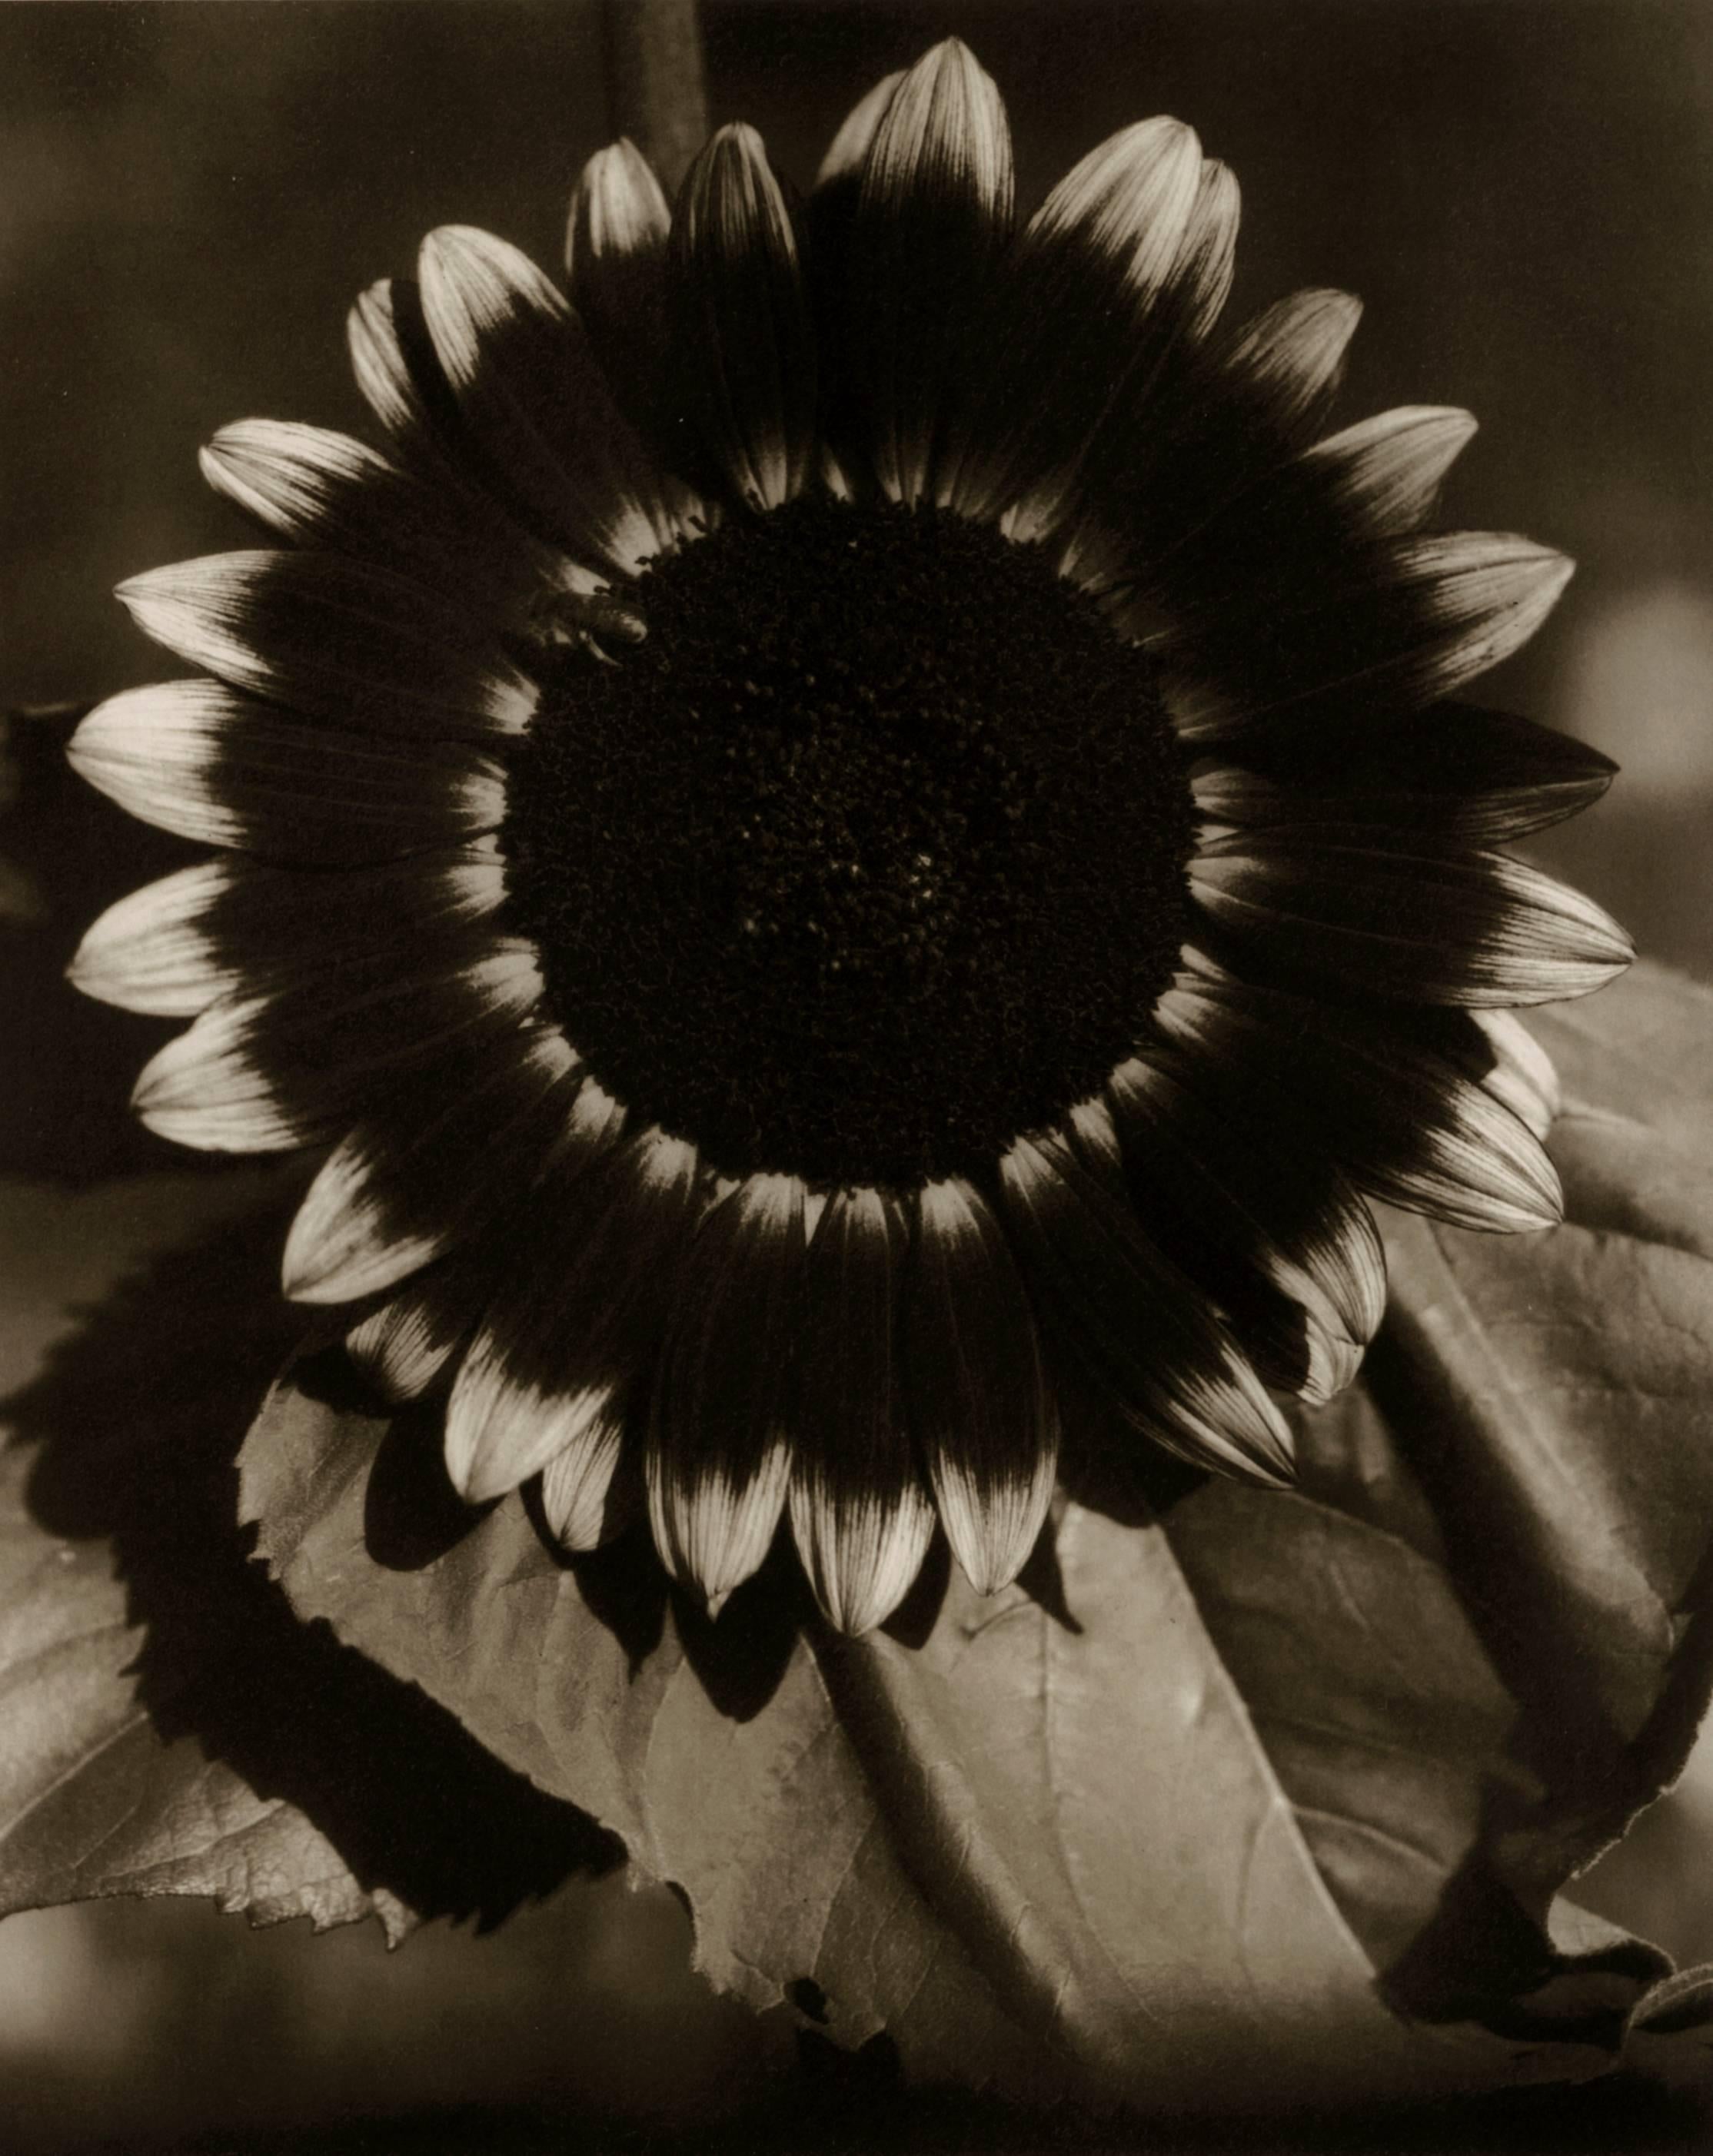 Edward Steichen Portrait Photograph - Bee on a Sunflower, Part of Series "Sunflowers from Seed to Seed"